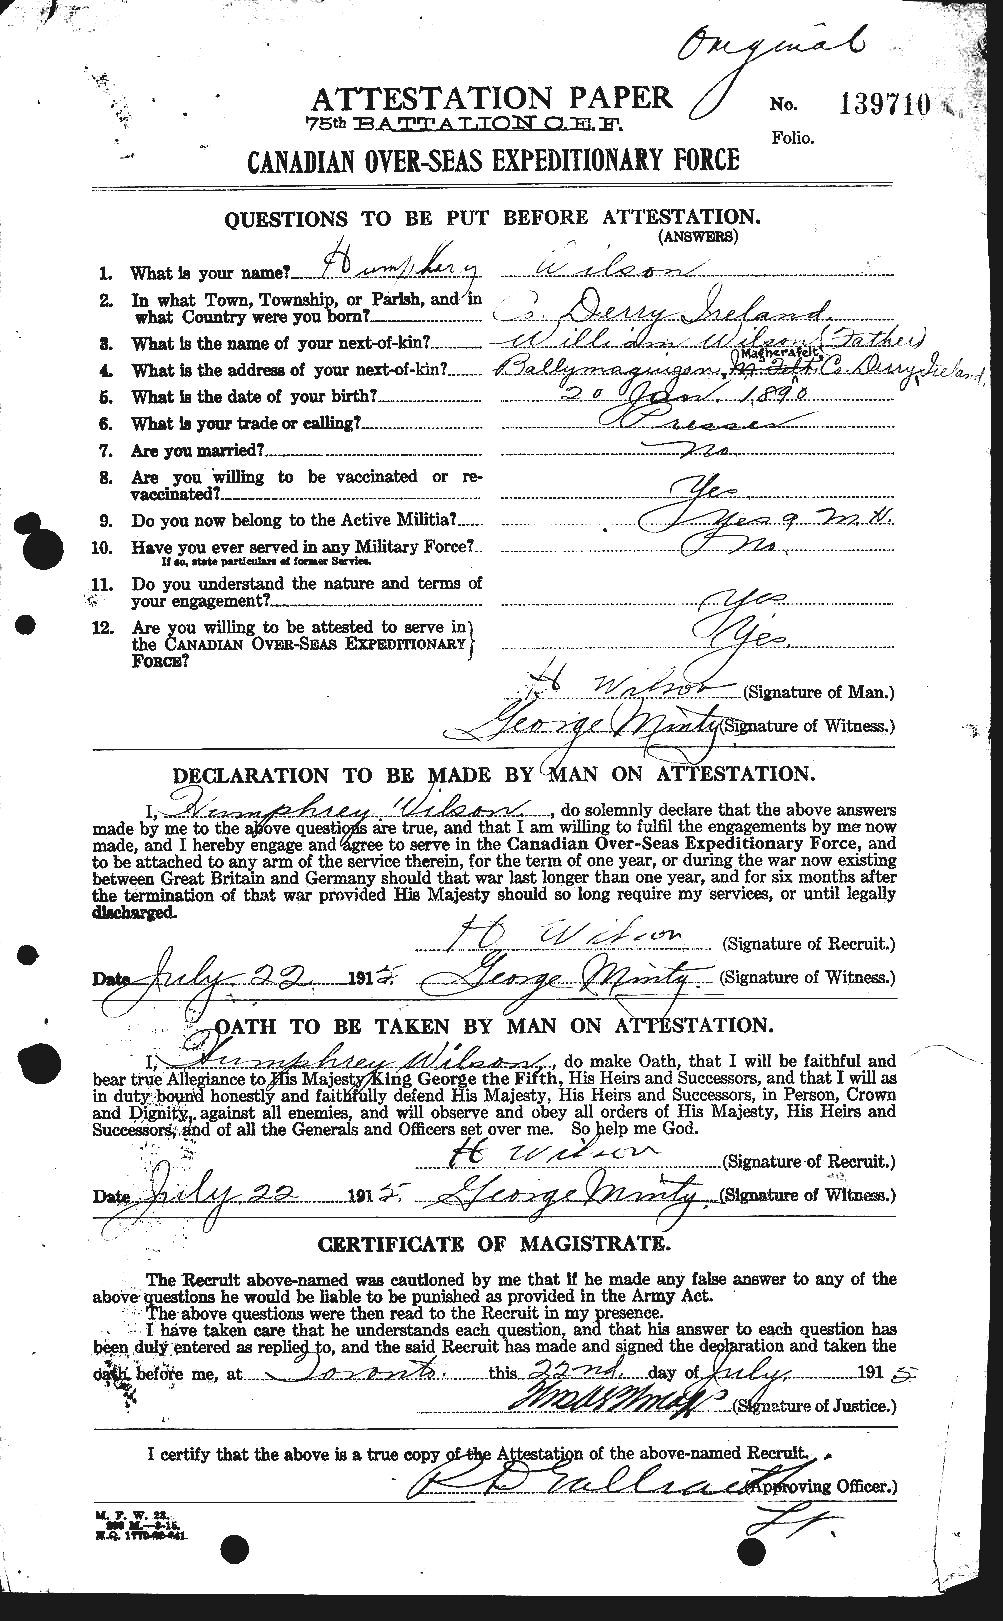 Personnel Records of the First World War - CEF 679620a